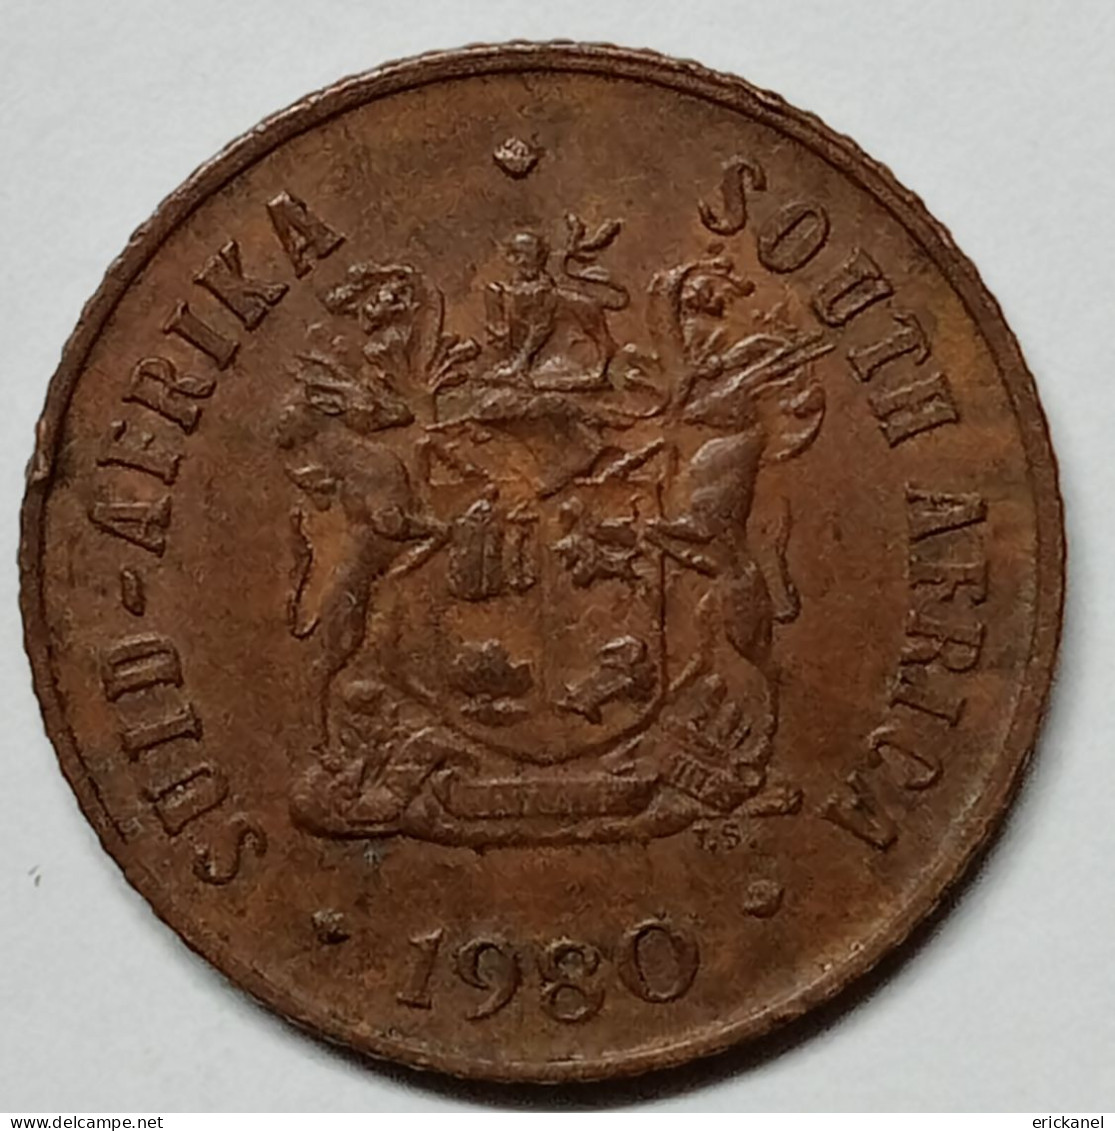 SOUTH AFRICA 1980 1 CENT - South Africa